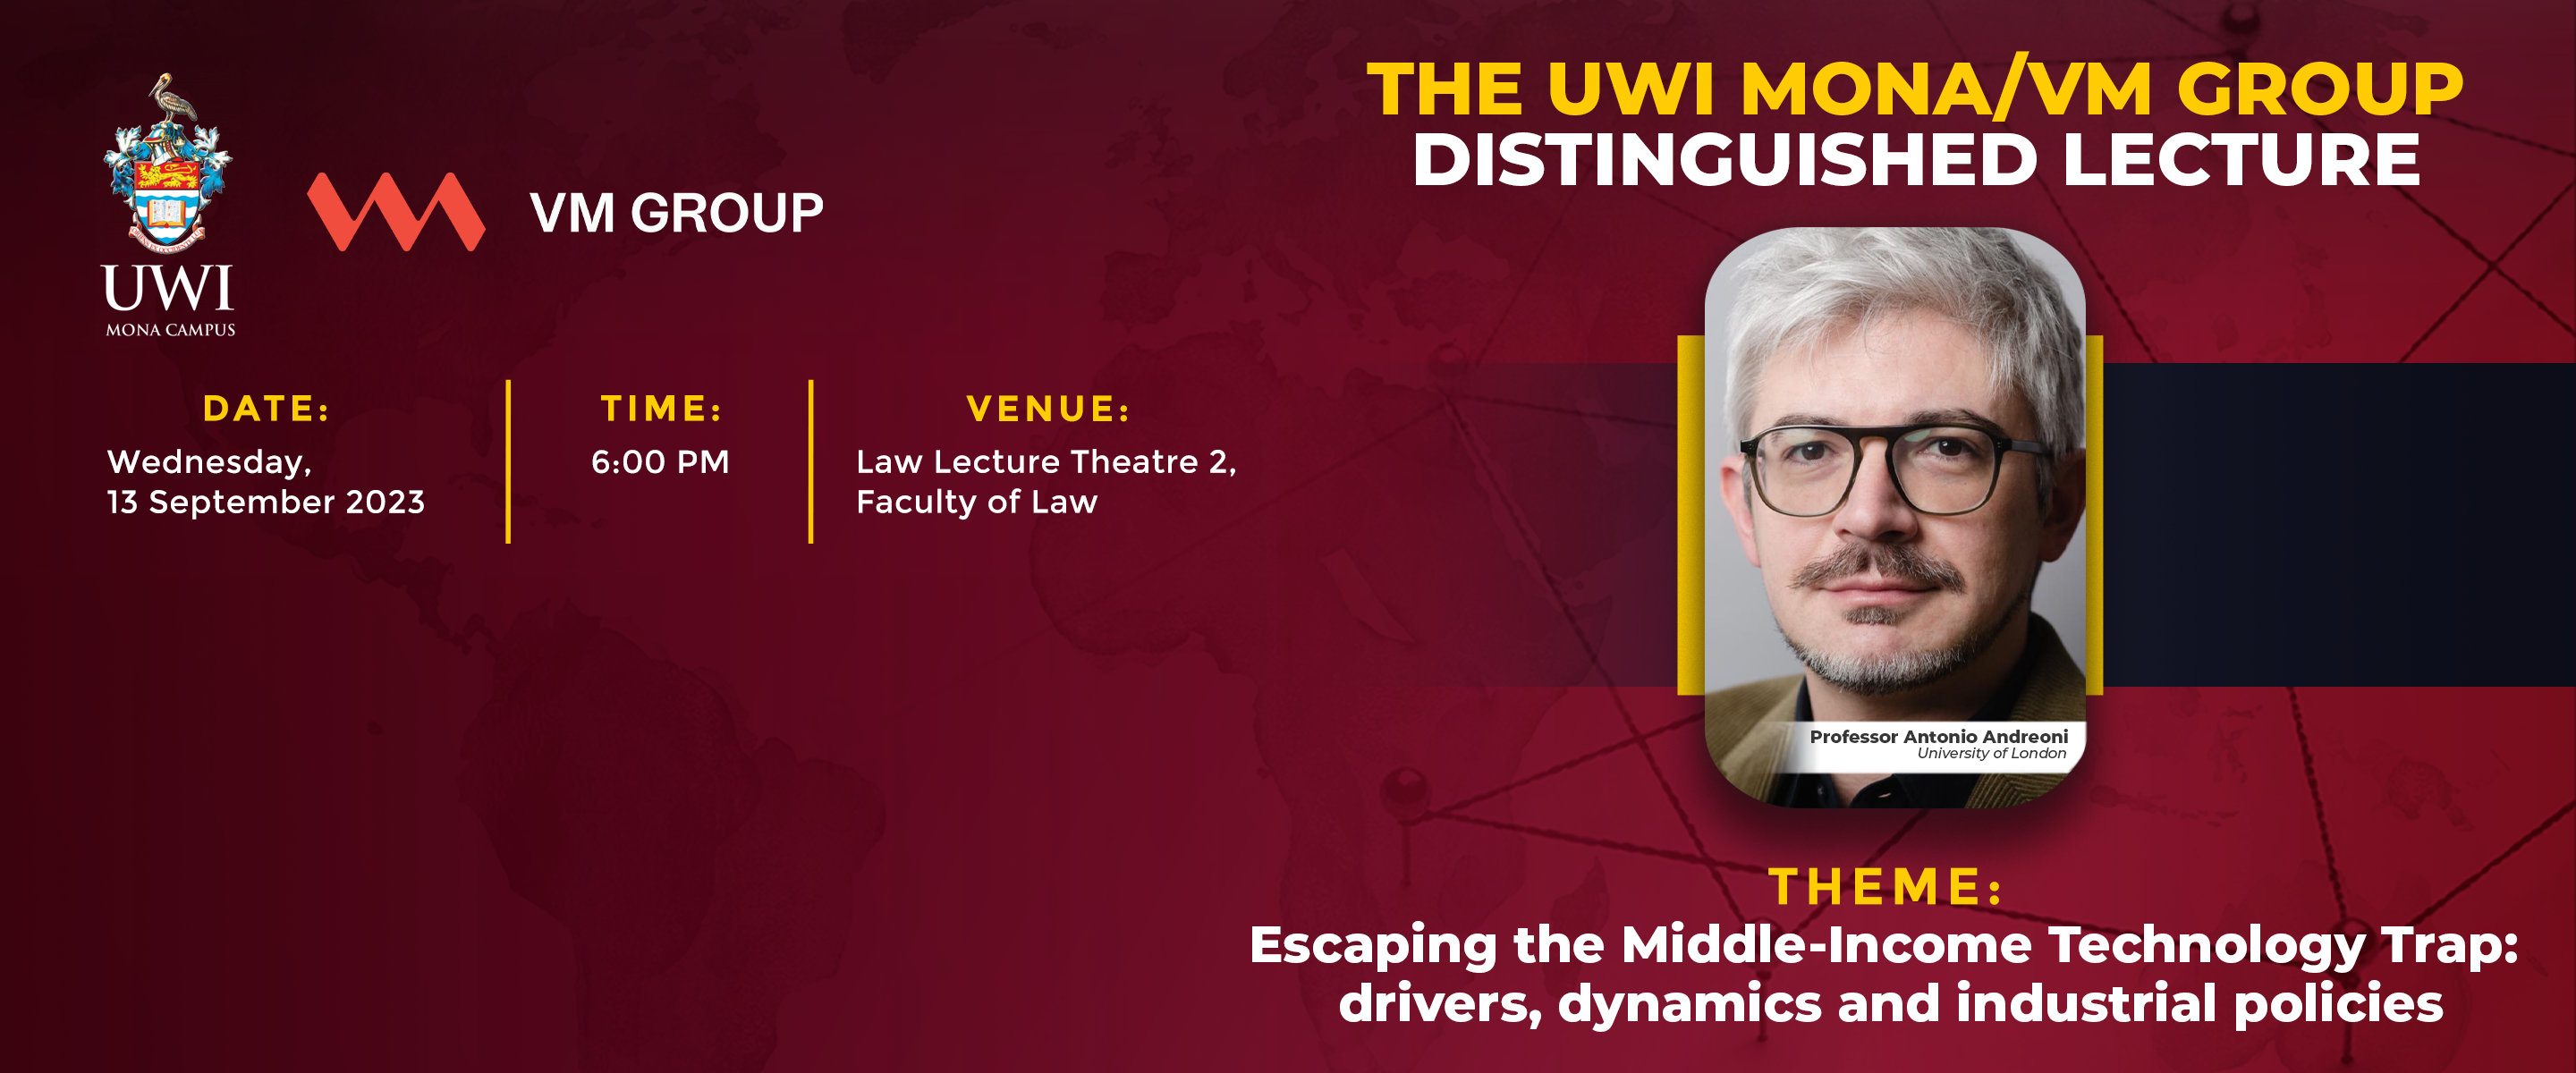 The UWI Mona/VM Group Distinguished Lecture